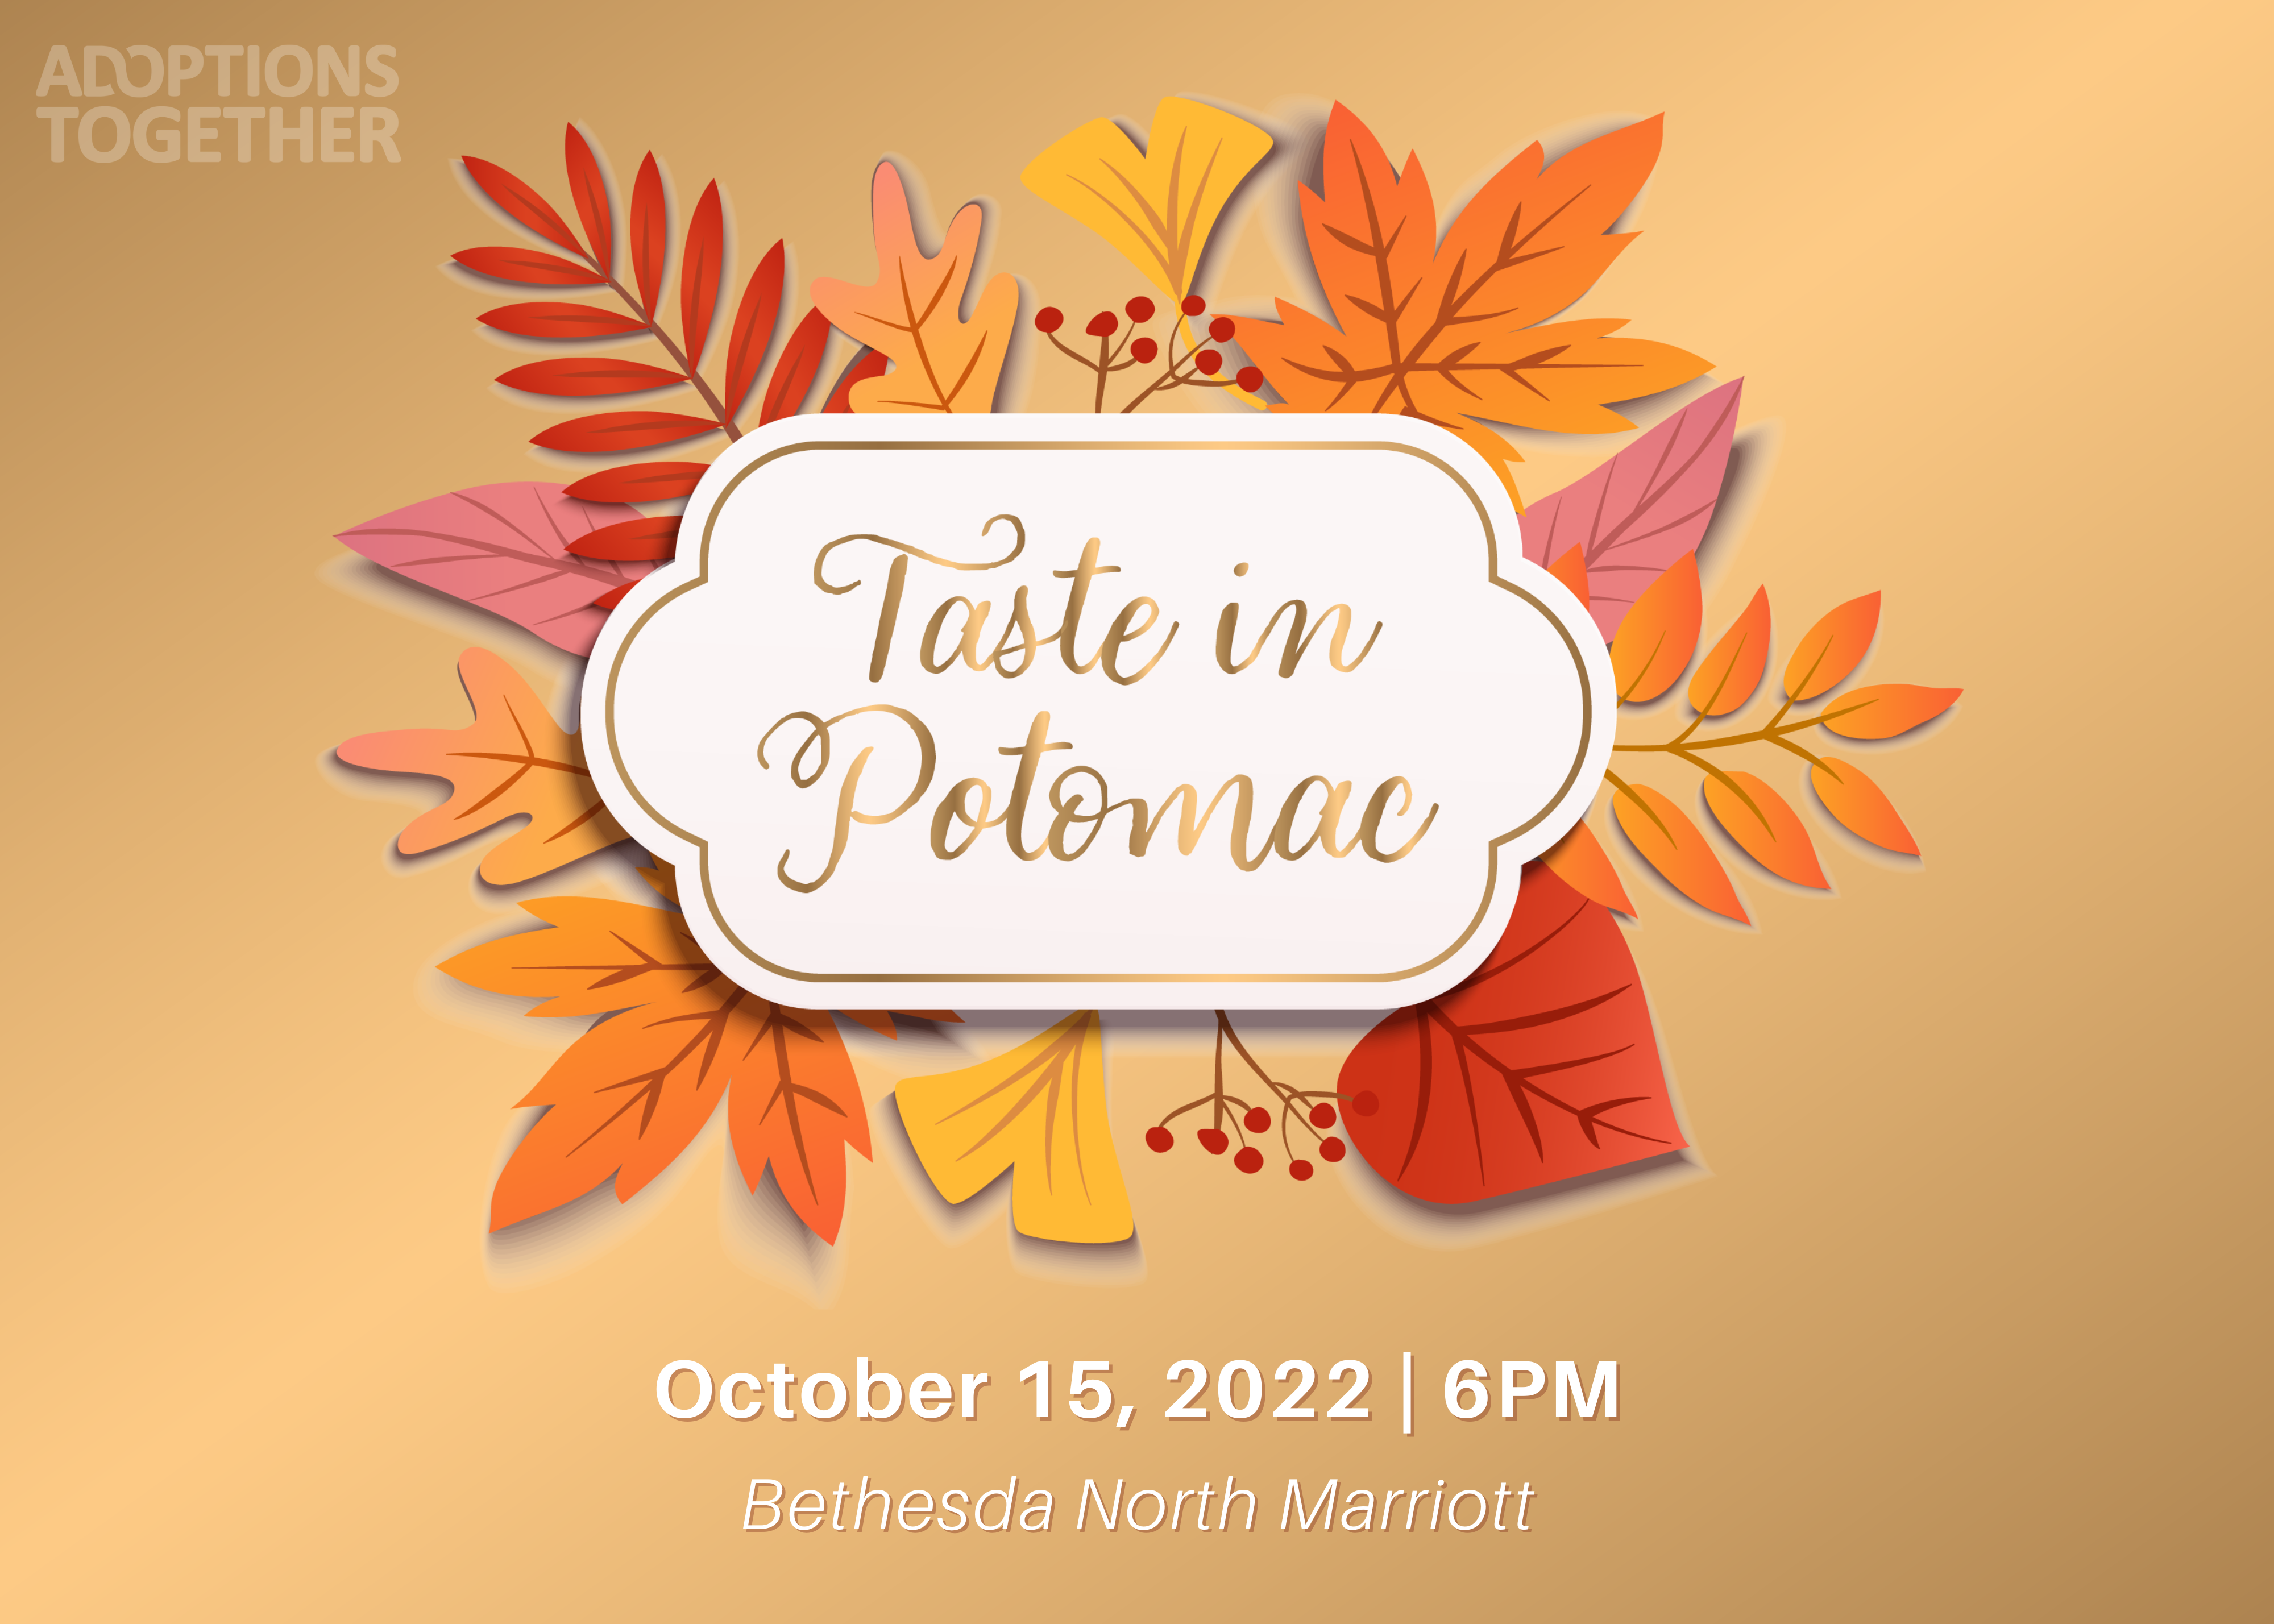 Taste in Potomac 2022 on October 15, 2022 at 6PM at the Bethesda North Marriott